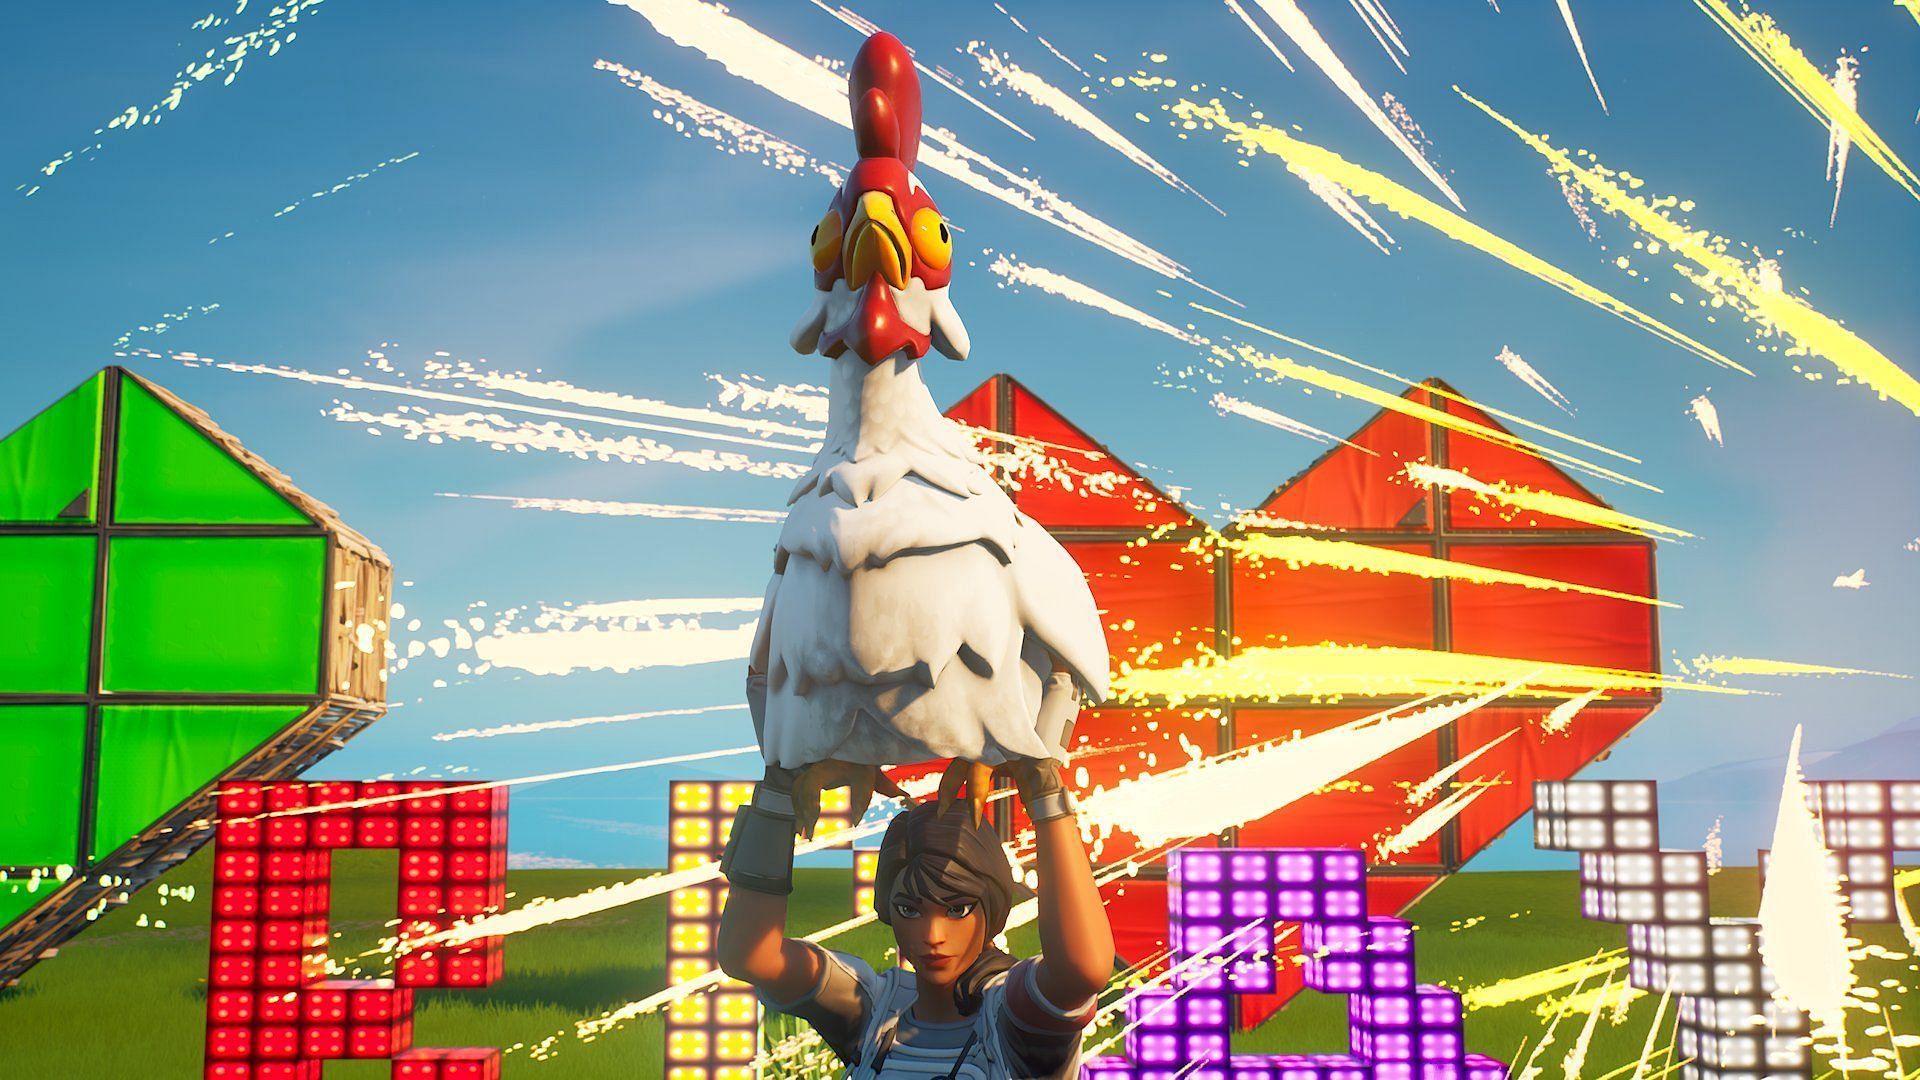 &ldquo;Legit had no idea the chickens even did this&rdquo;: Fortnite player showcases a brilliant way to utilise the chickens, community left in awe